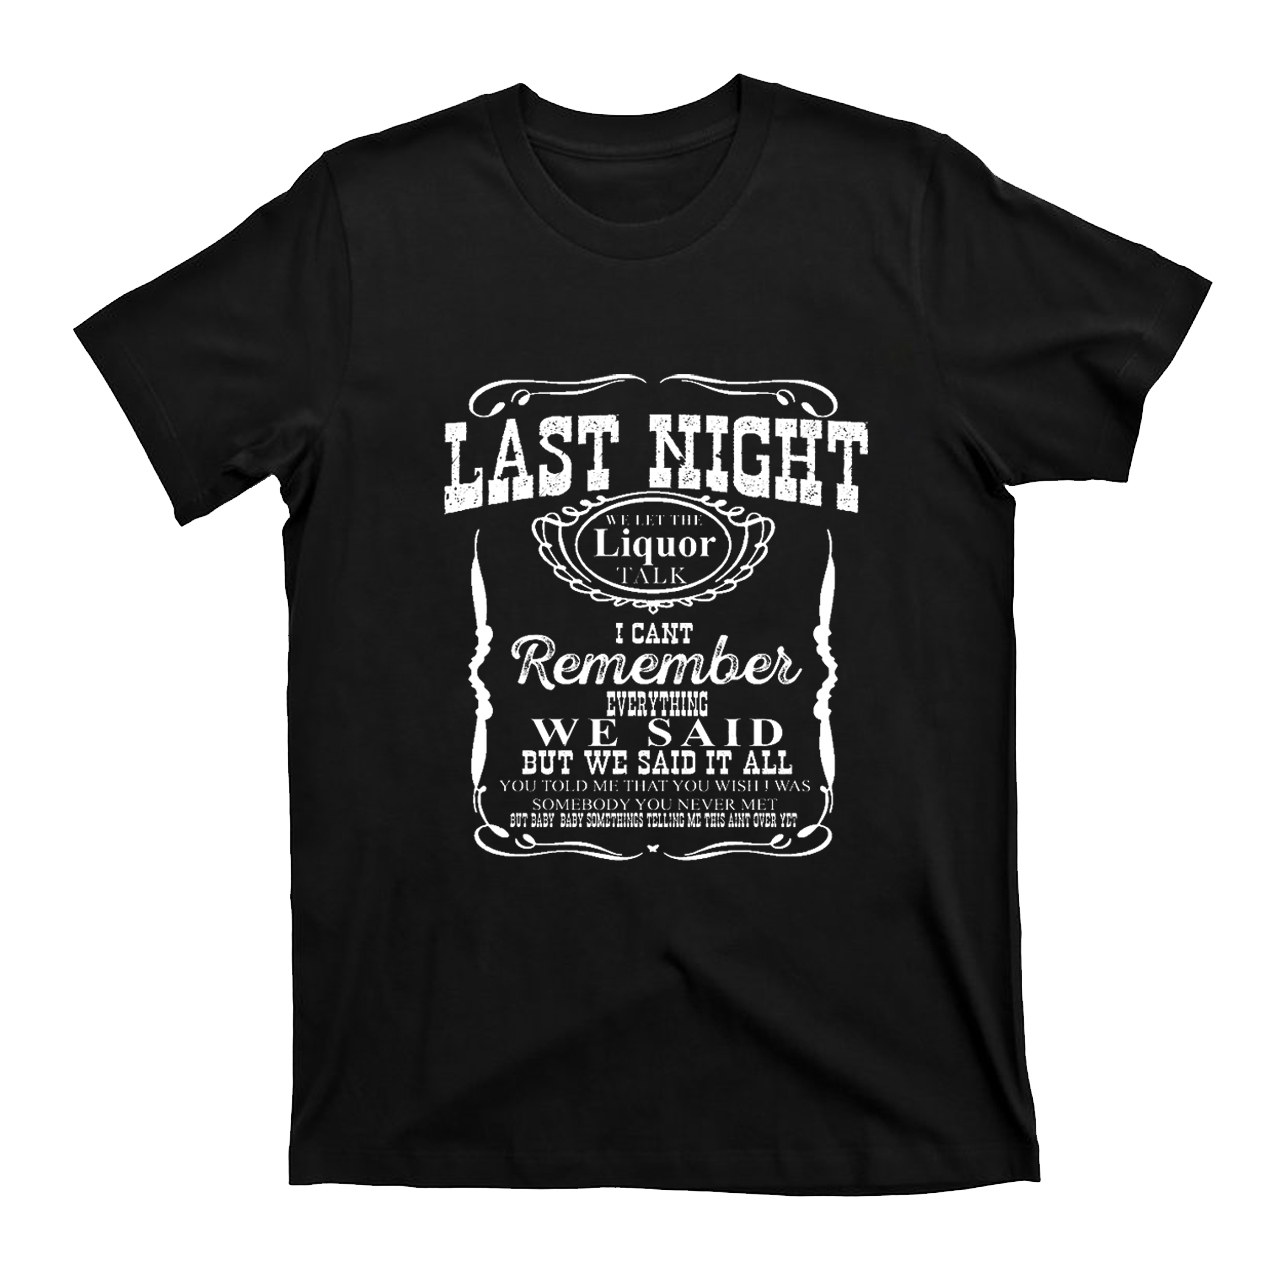 Last Night Remember Everything We Said
T-Shirts